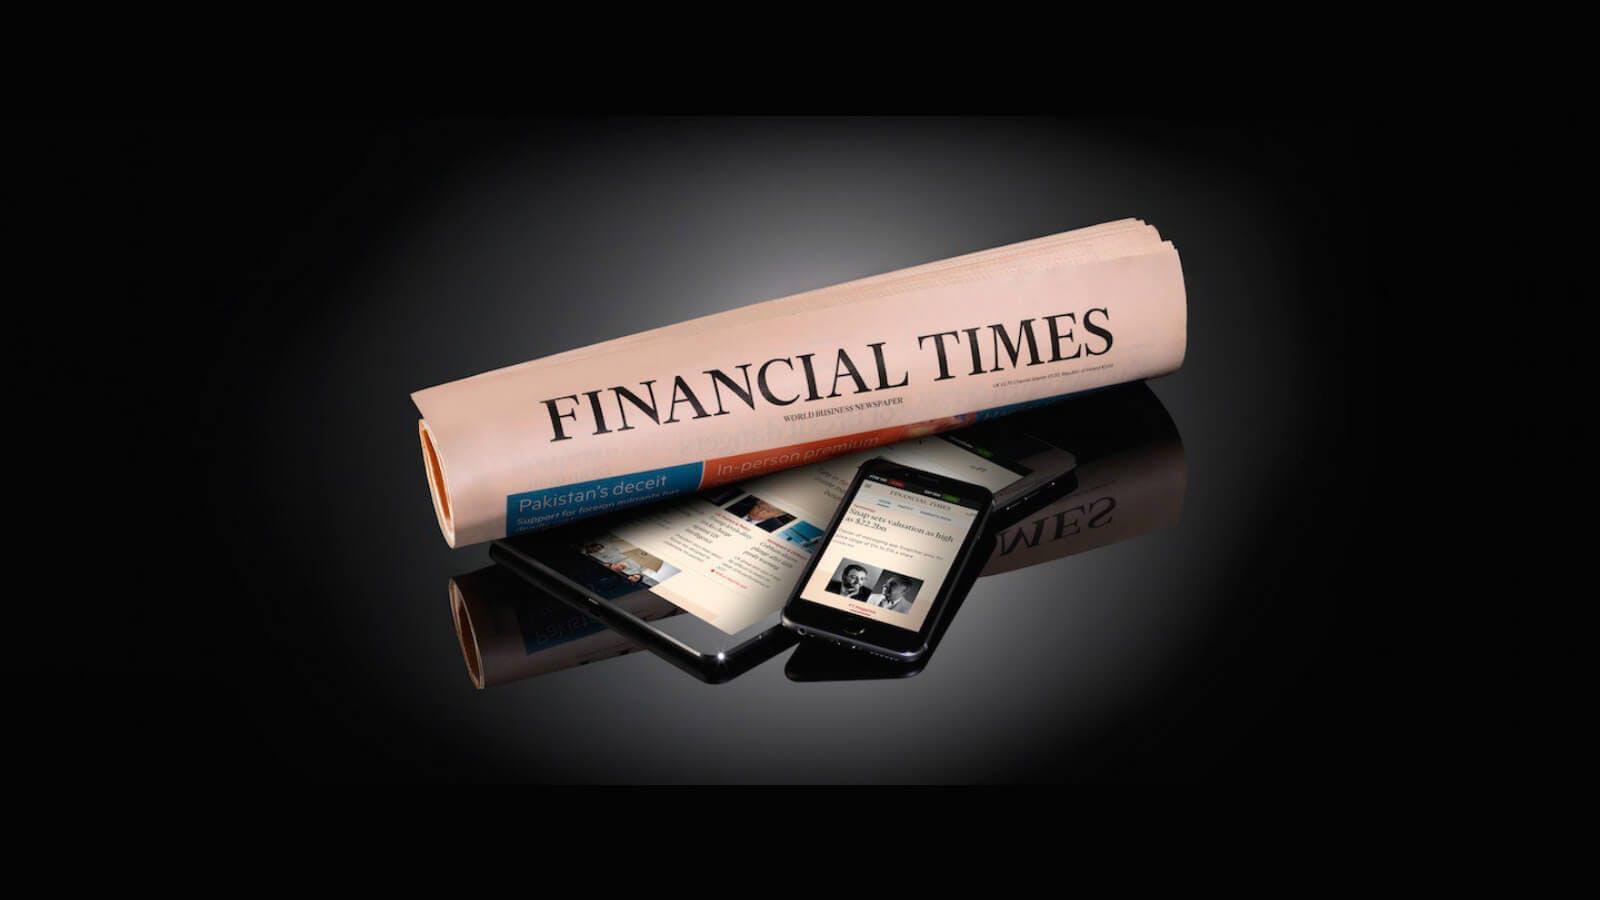 The Financial Times newspaper 